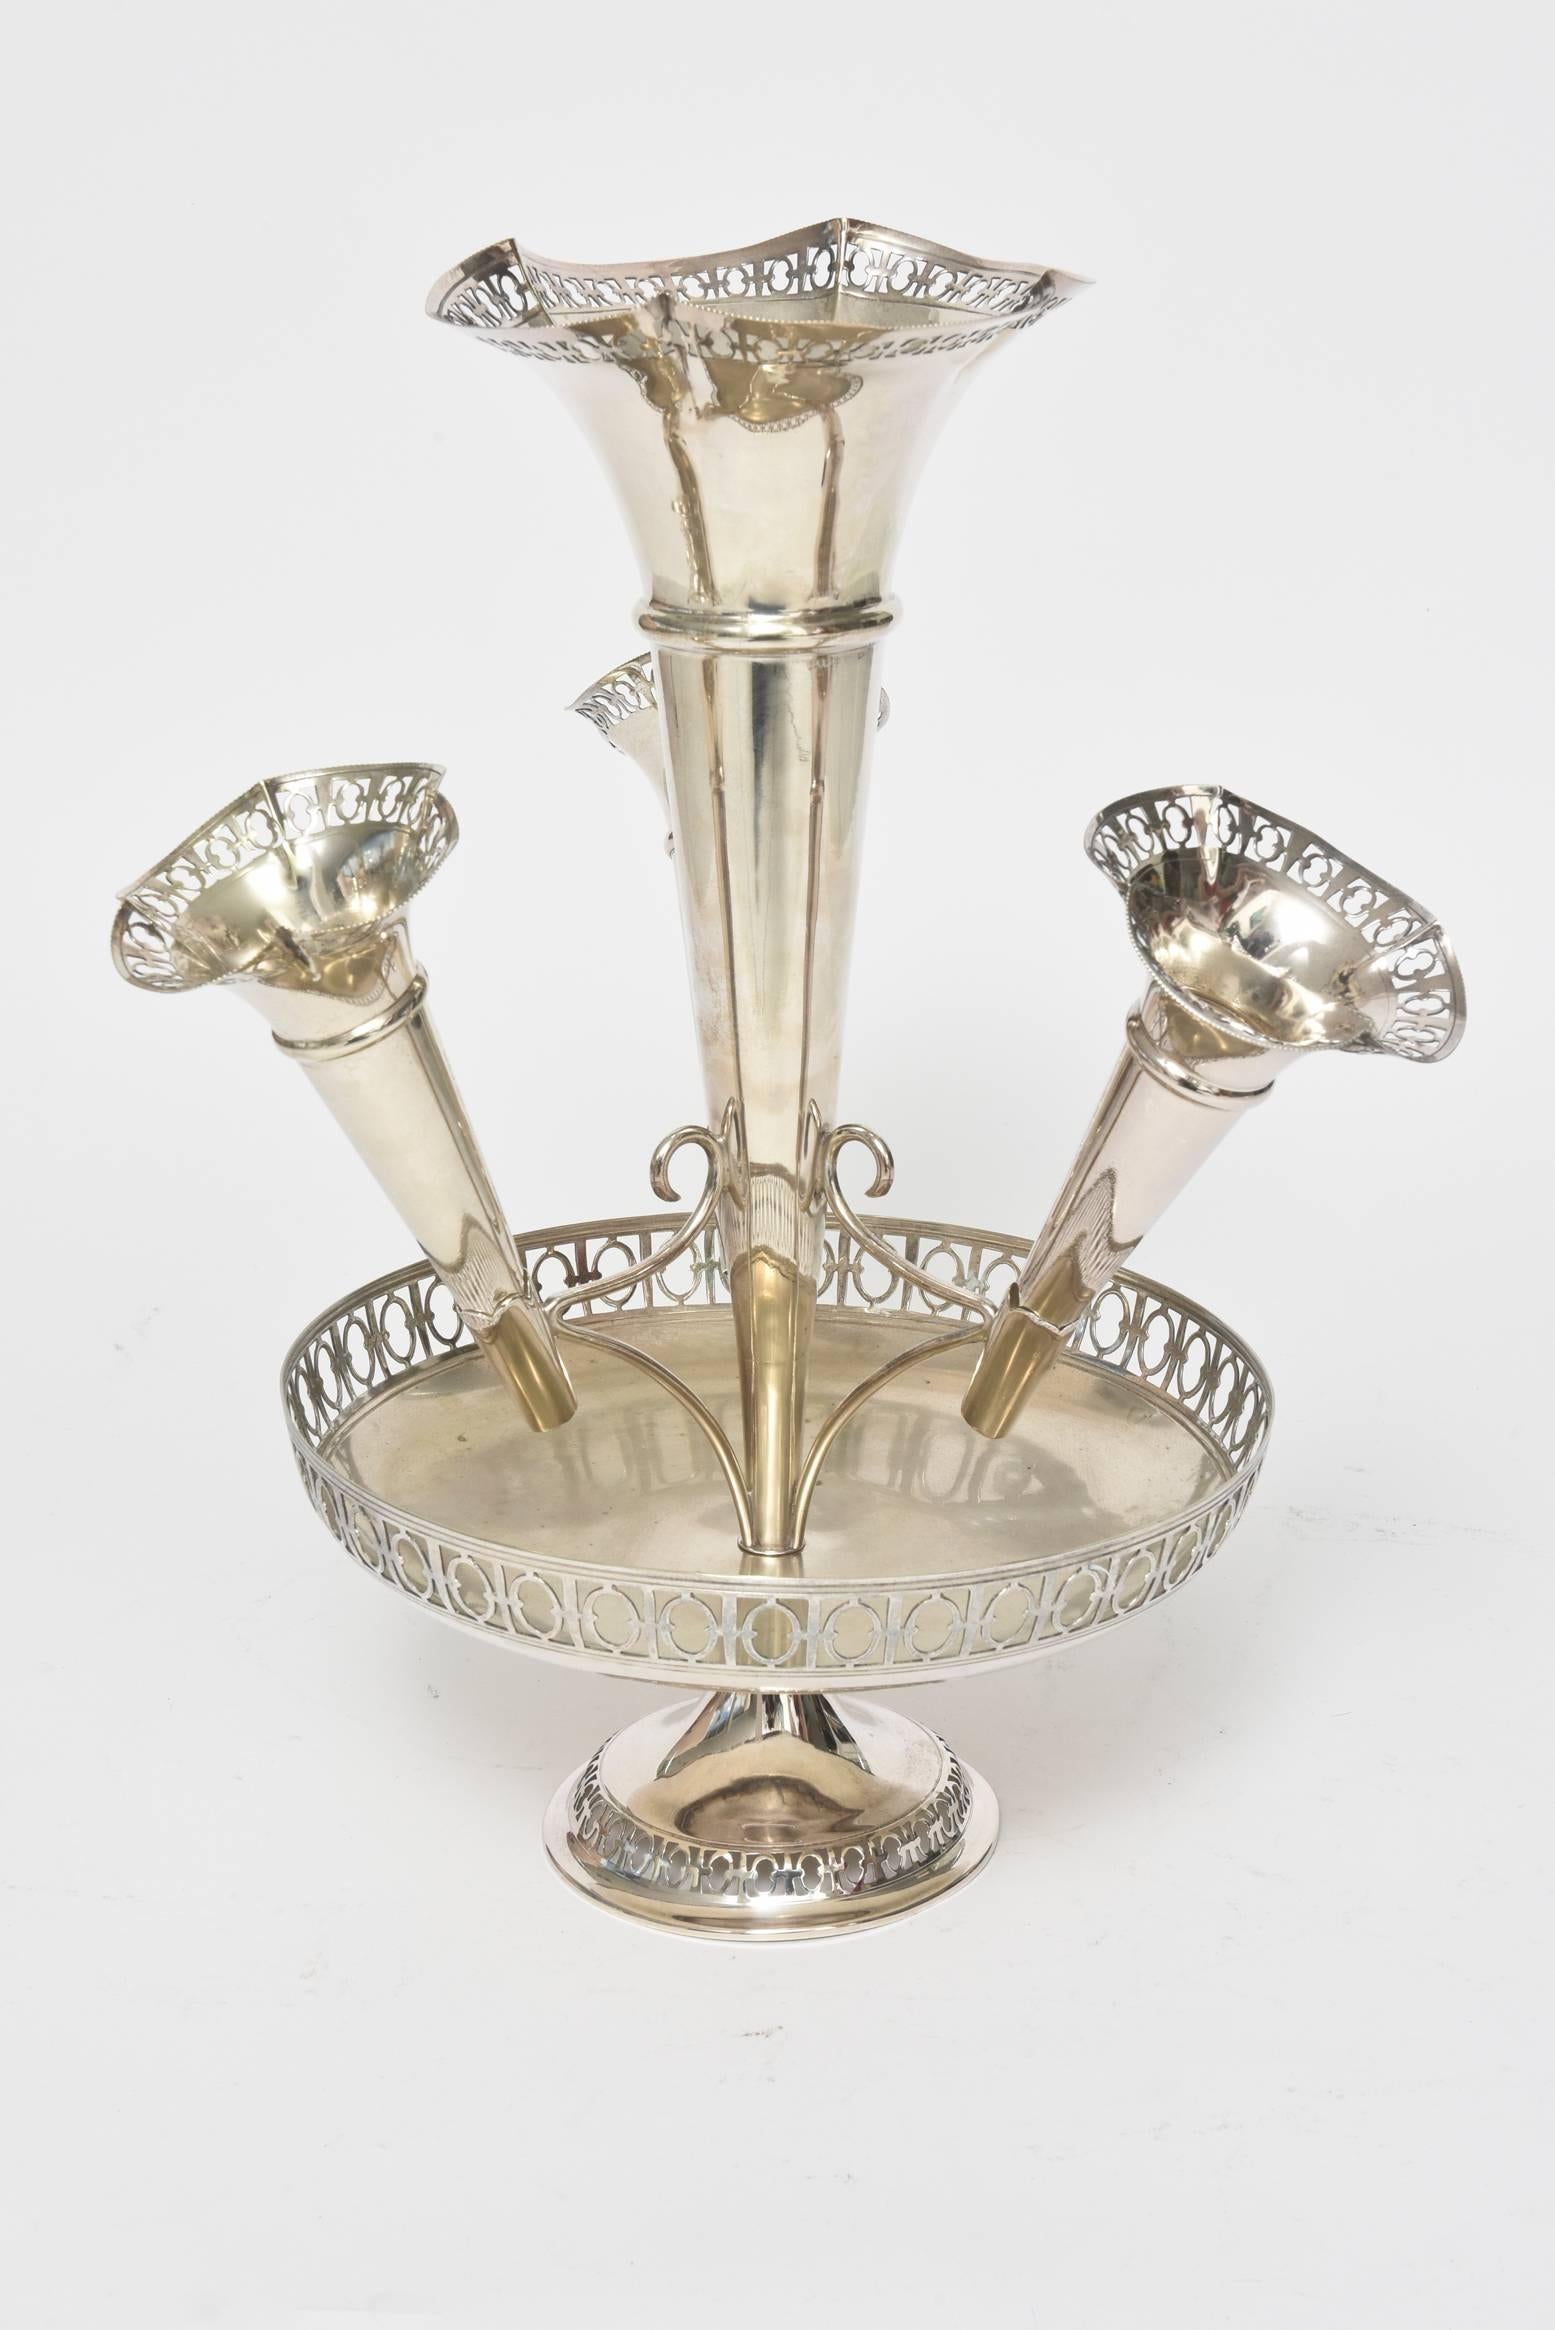 This beautiful epergne was made by S.J. Levi & Co. (1901-1938) in Birmingham England at the beginning of the 20th Century.  This impressive silver plate piece features 1 large center trumpet vase amid 3 smaller vases which hold flowers elevated